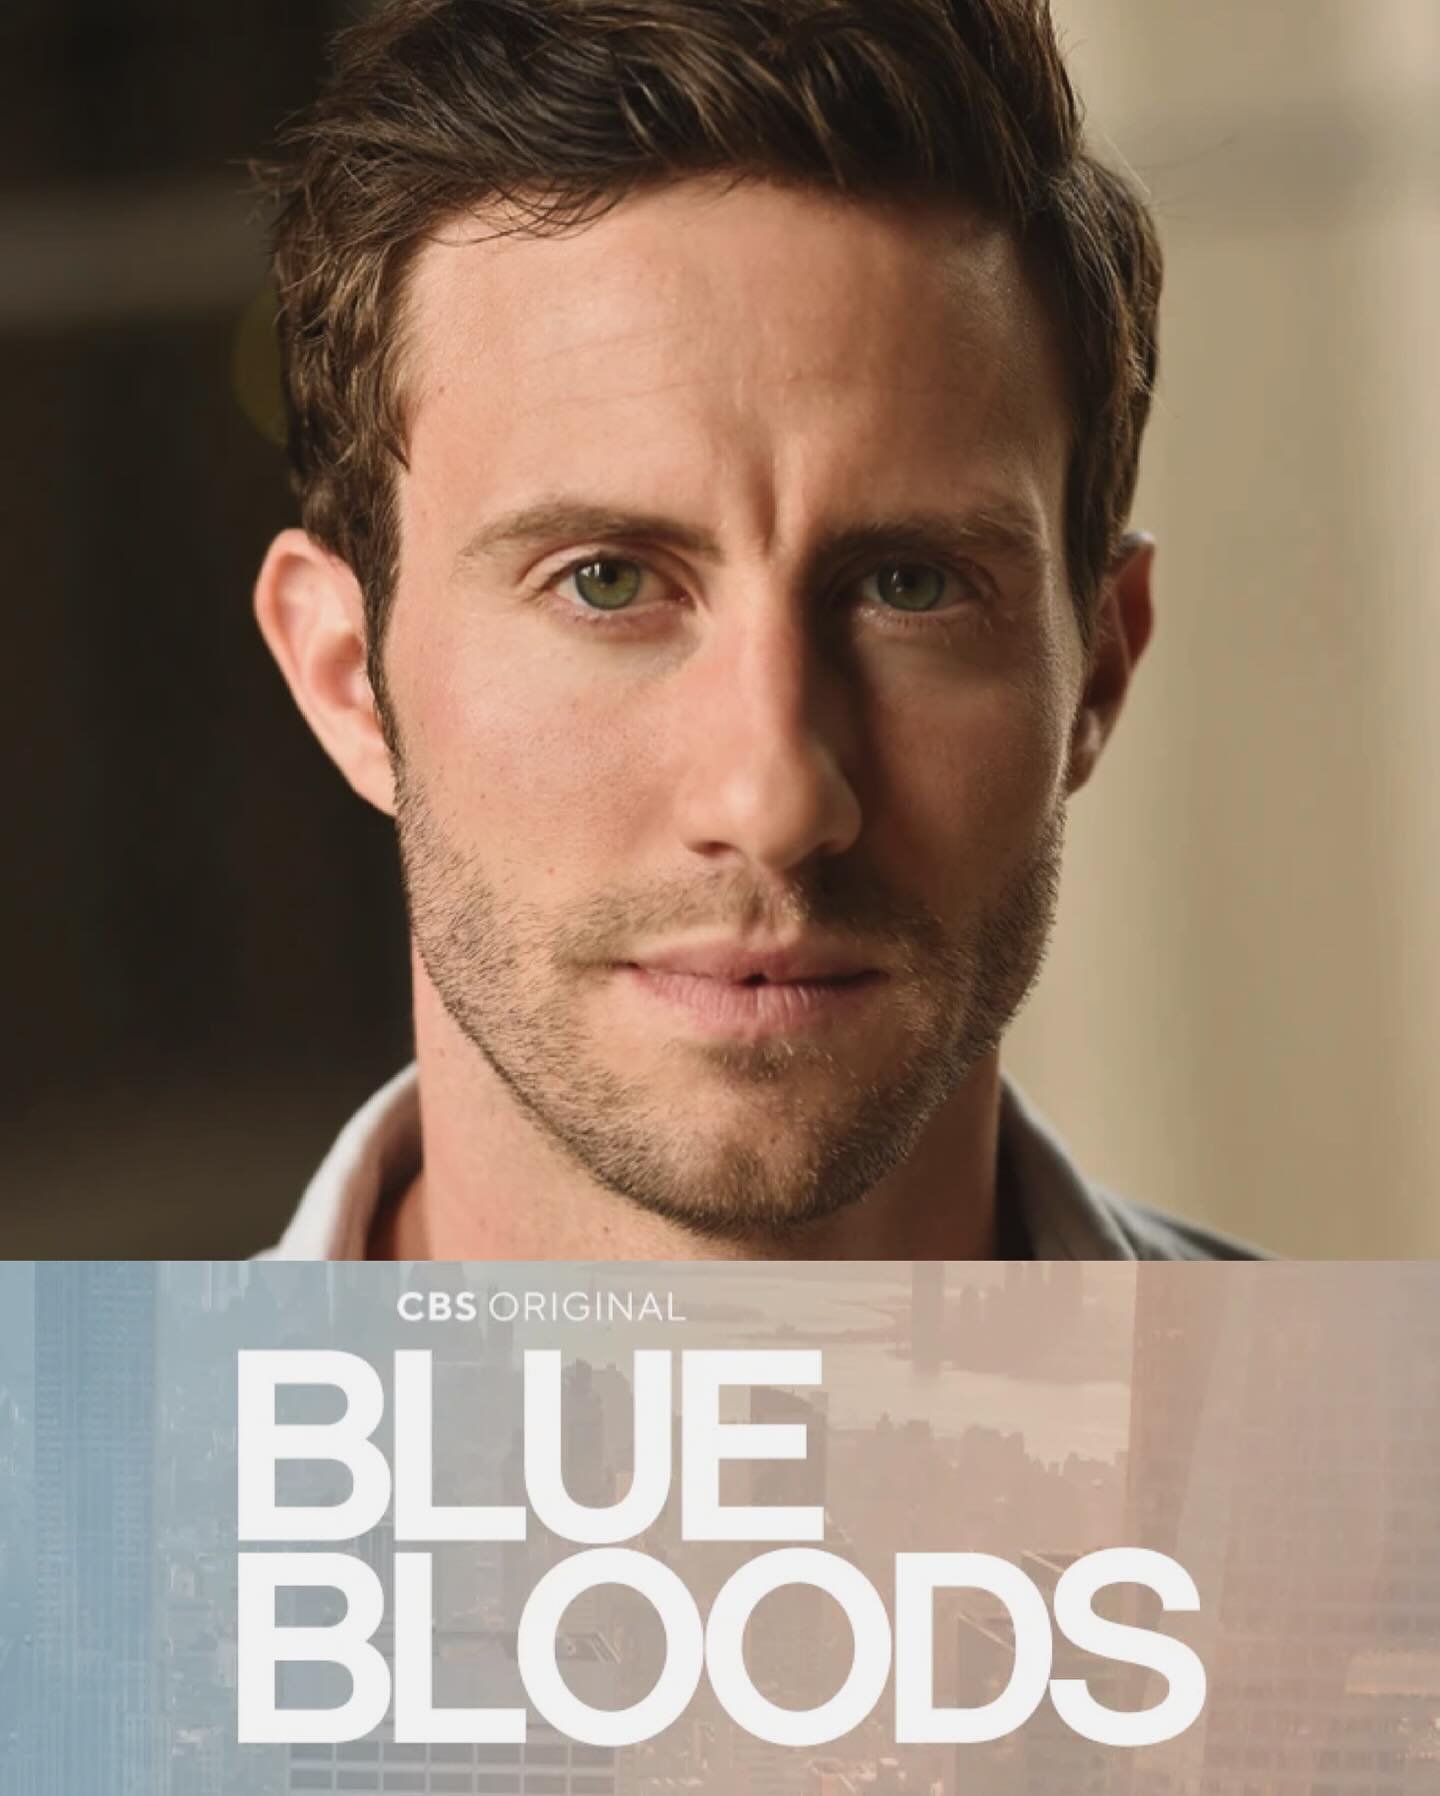 Jason Burkey Guest Stars on tonight&rsquo;s new episode of @bluebloods_cbs! Don&rsquo;t miss it! ⭐️